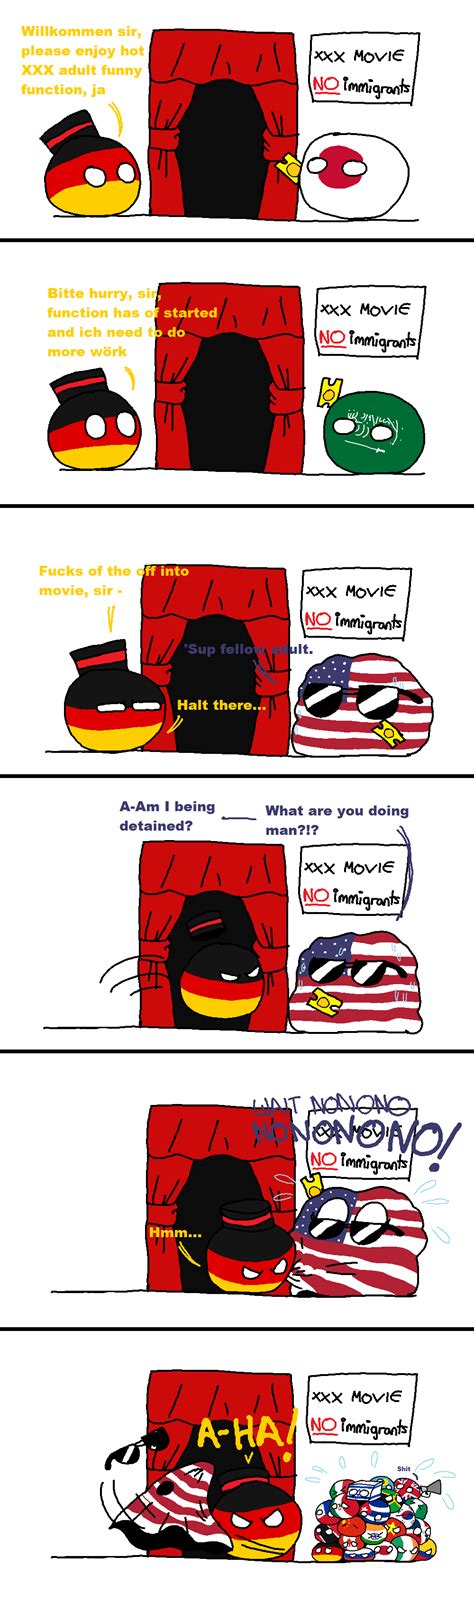 Polandball History Memes History Facts Funny Images Funny Pictures